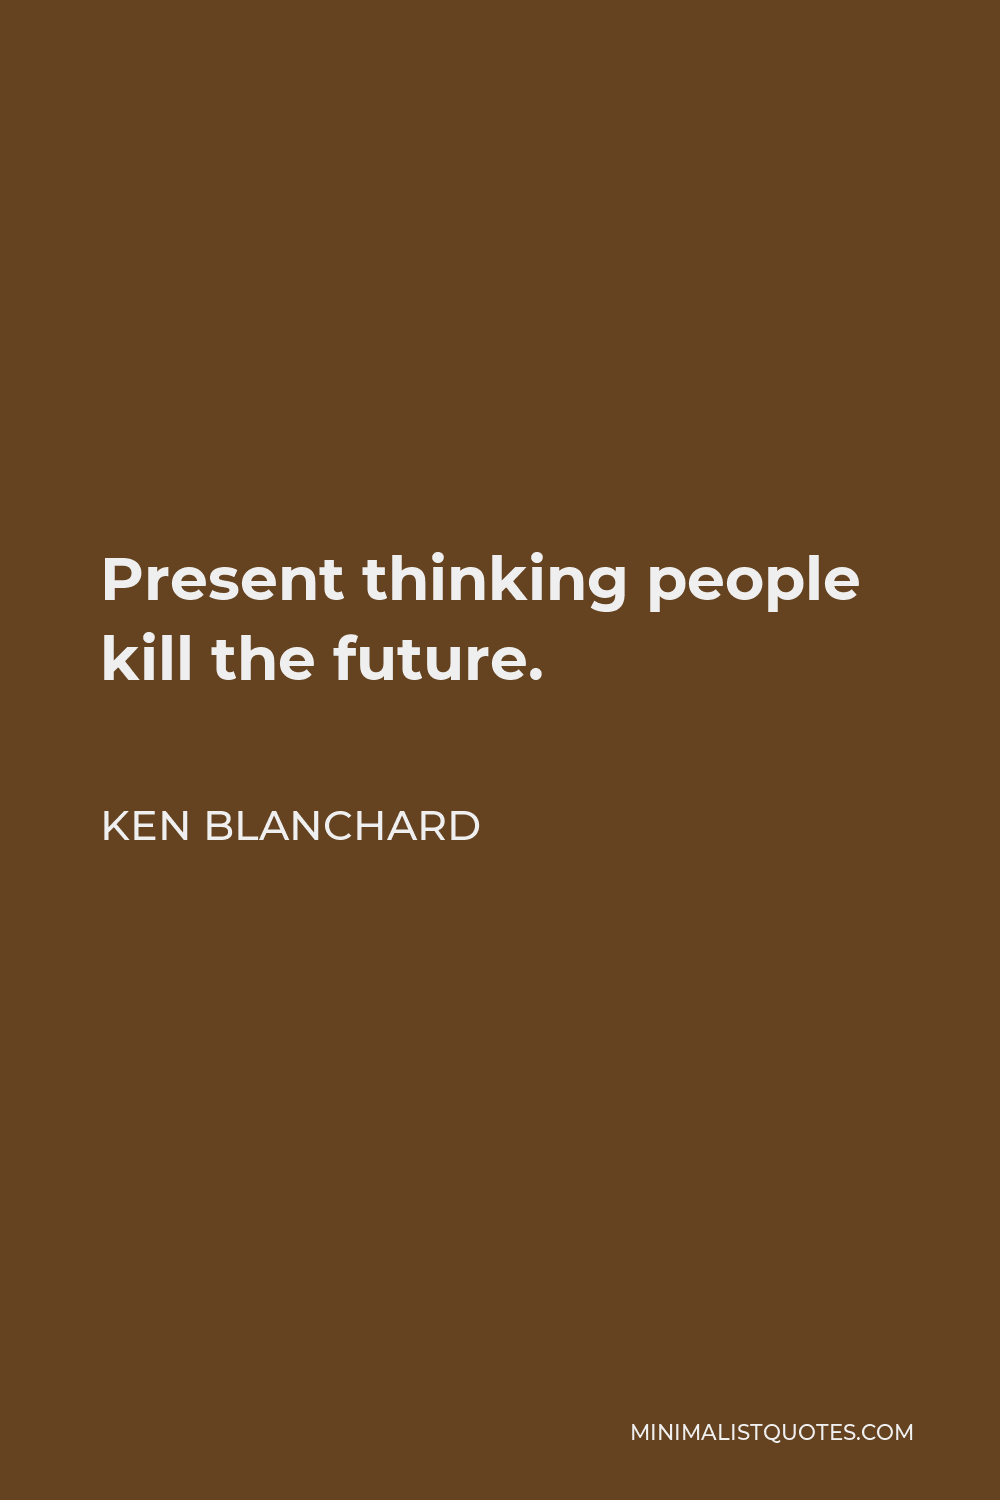 Ken Blanchard Quote - Present thinking people kill the future.